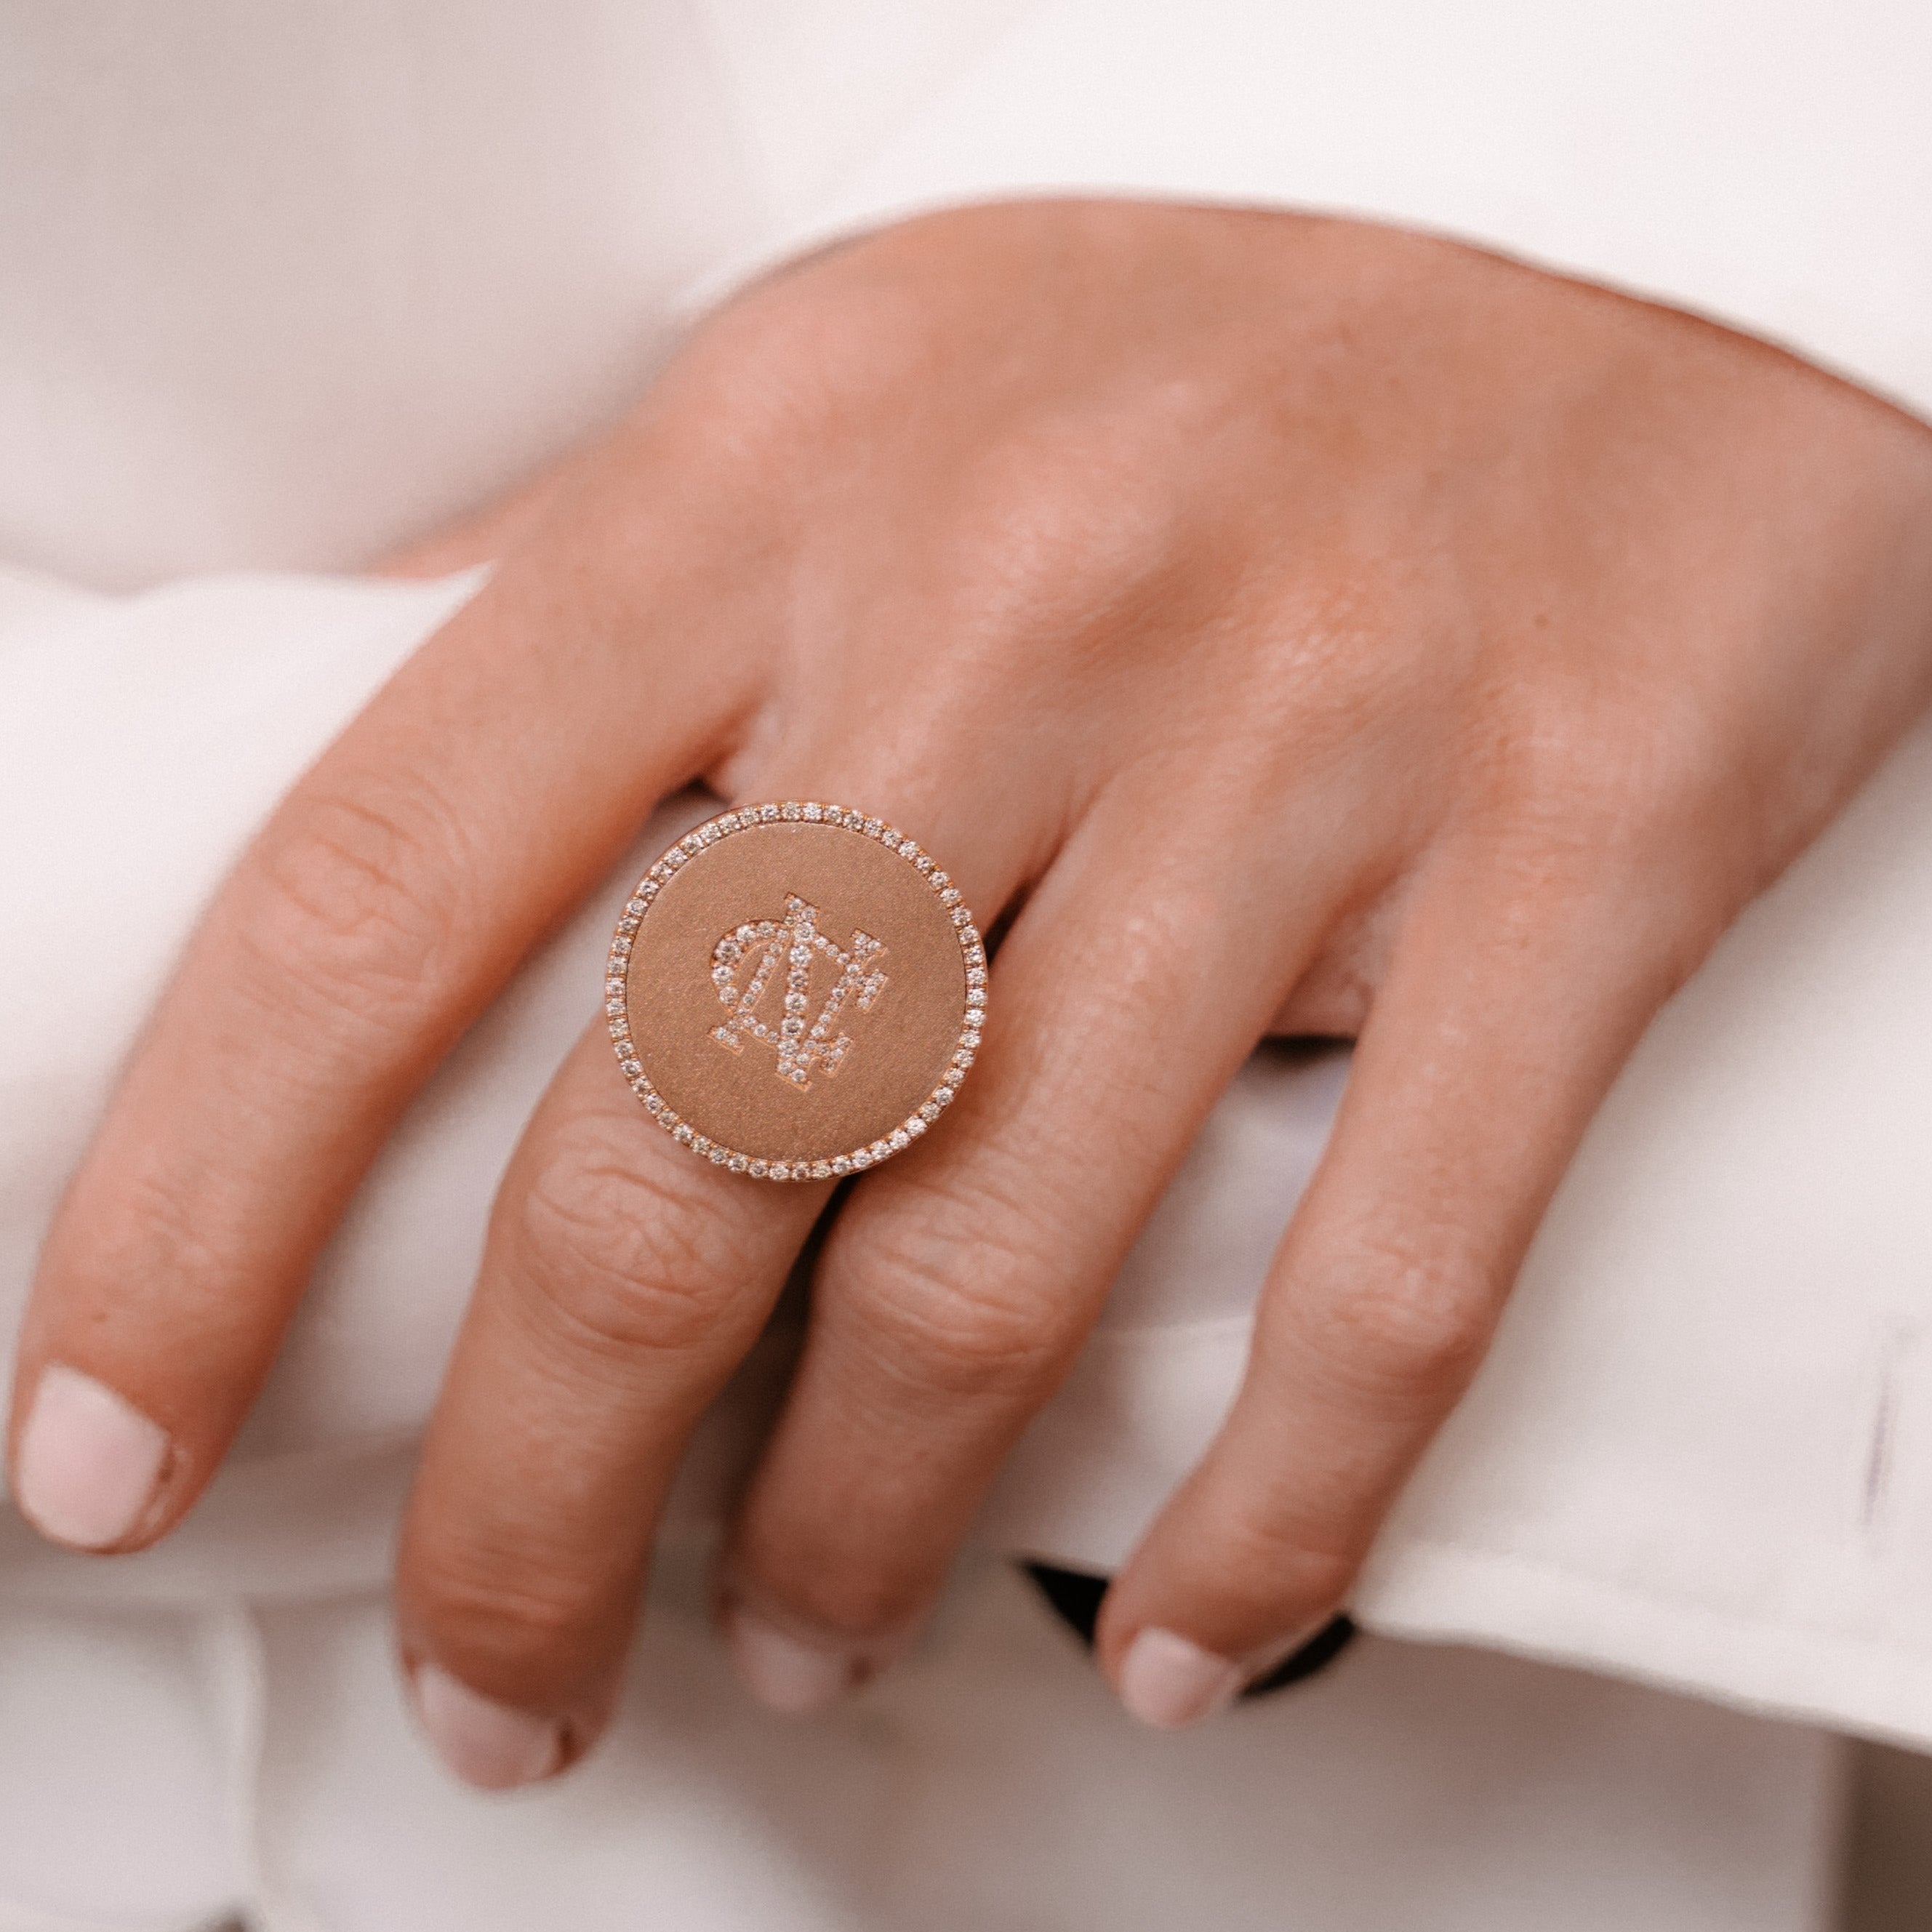 Circular rose ring on hands with initials set in diamonds made by O! Jewelry